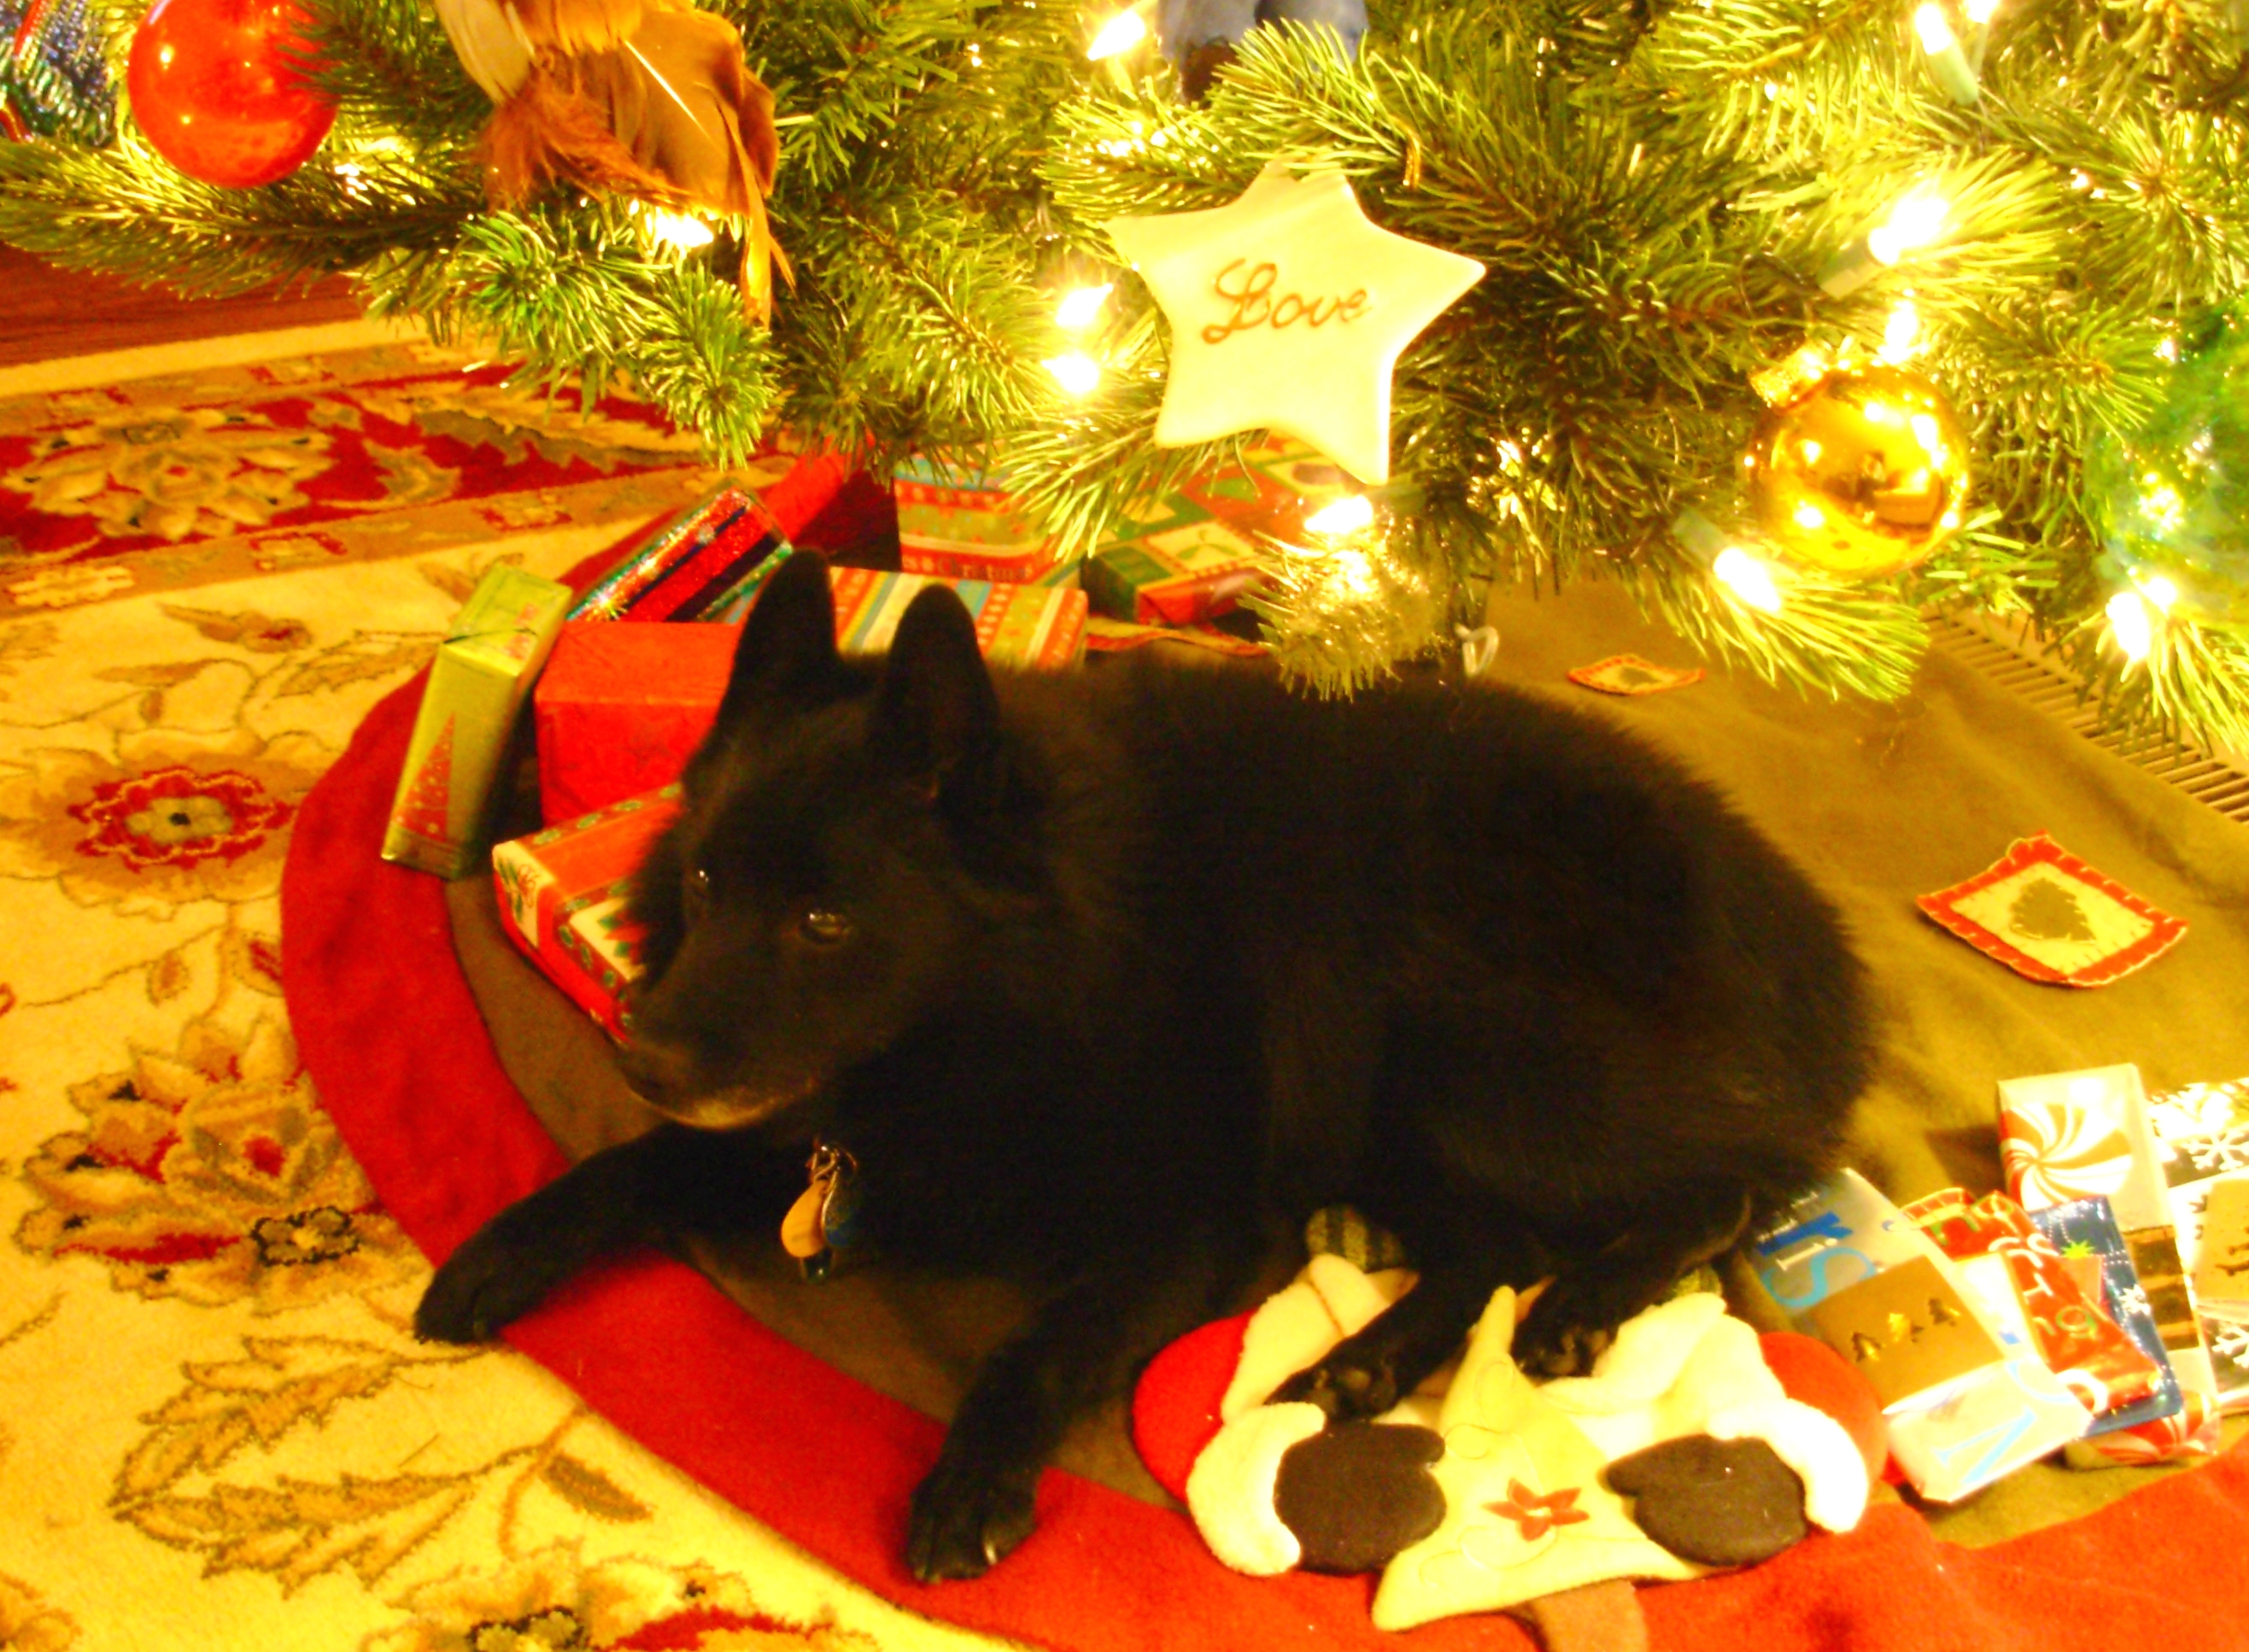 Pasha always loved to relax under the Christmas tree.  December 2010